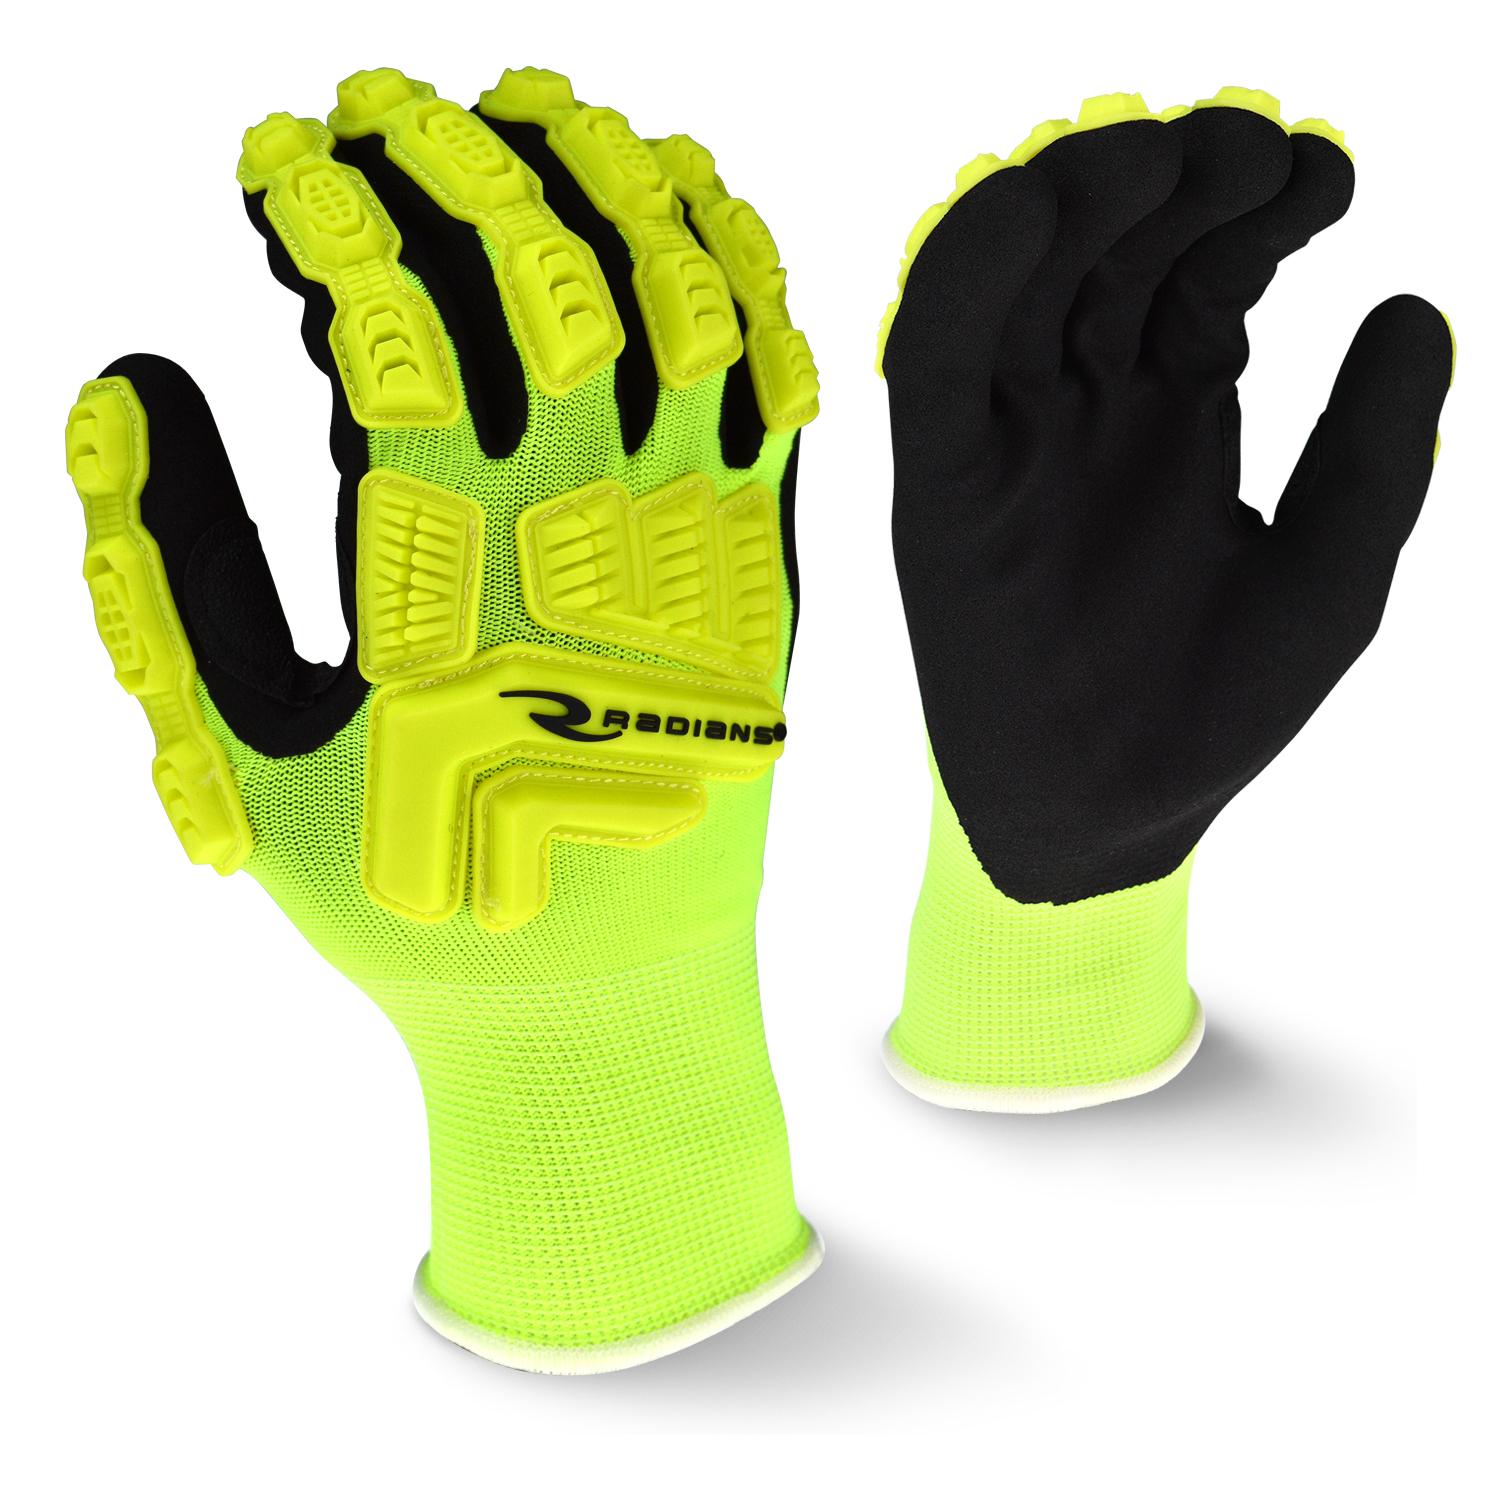 RWG21 High Visibility Work Glove with TPR - Size L - Utility Gloves